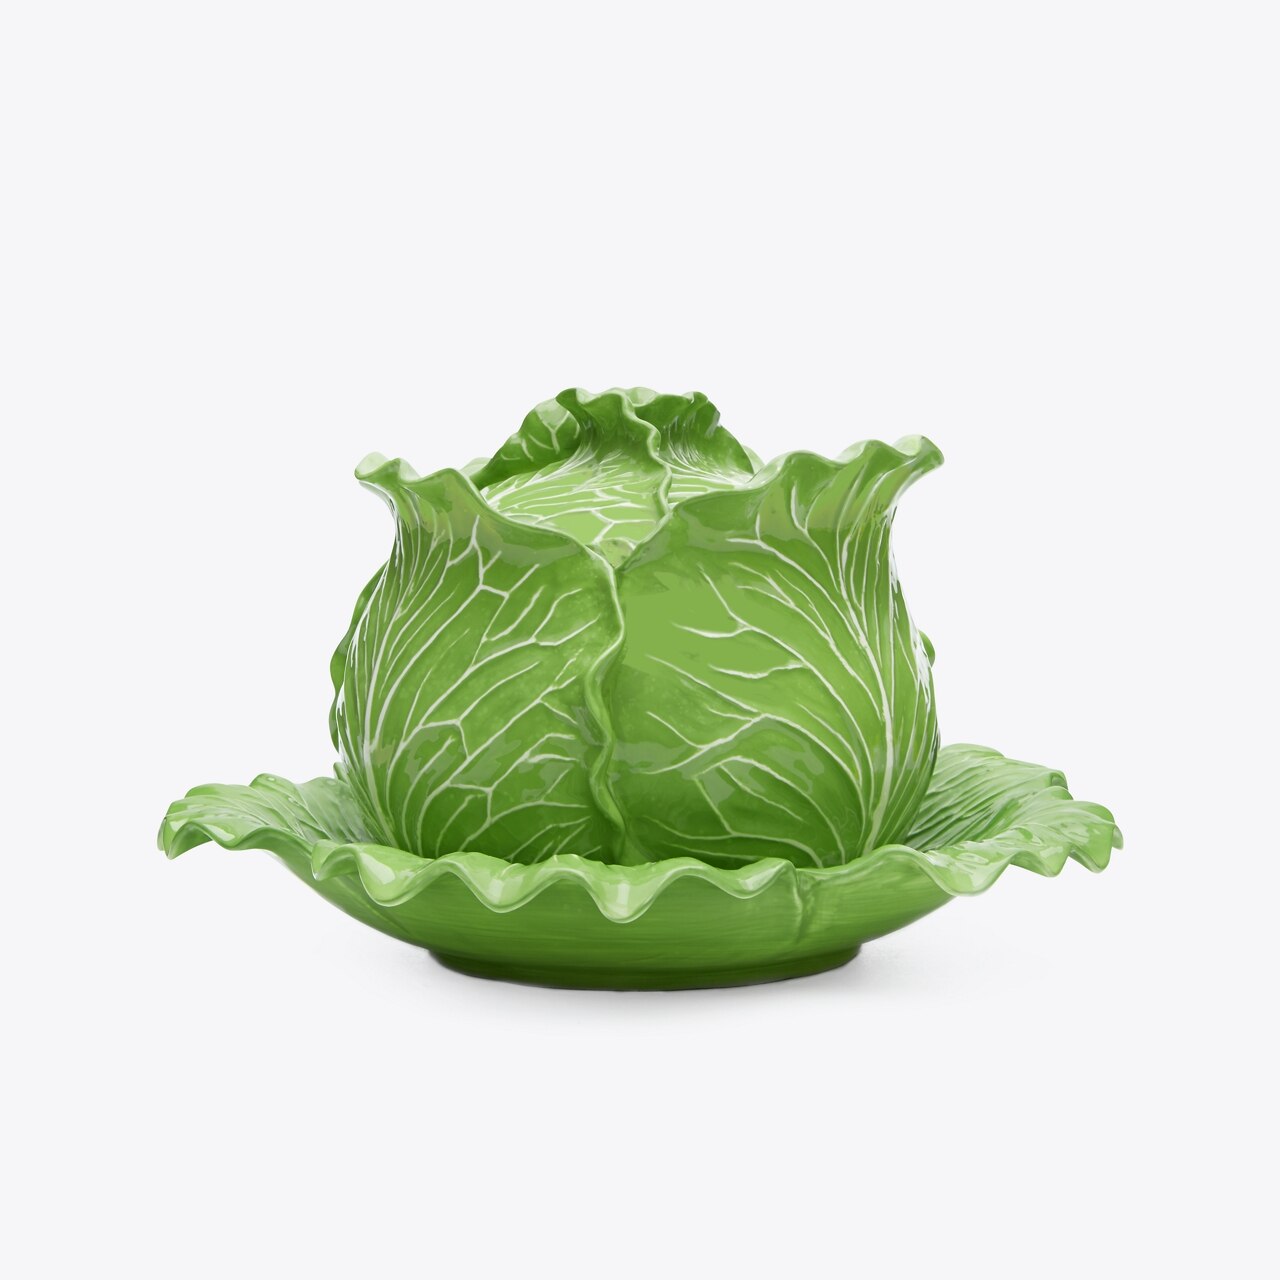 https://s7.toryburch.com/is/image/ToryBurch/style/lettuce-ware-covered-tureen-front.TB_14963_307_SLFRO.pdp-1280x1280.jpg